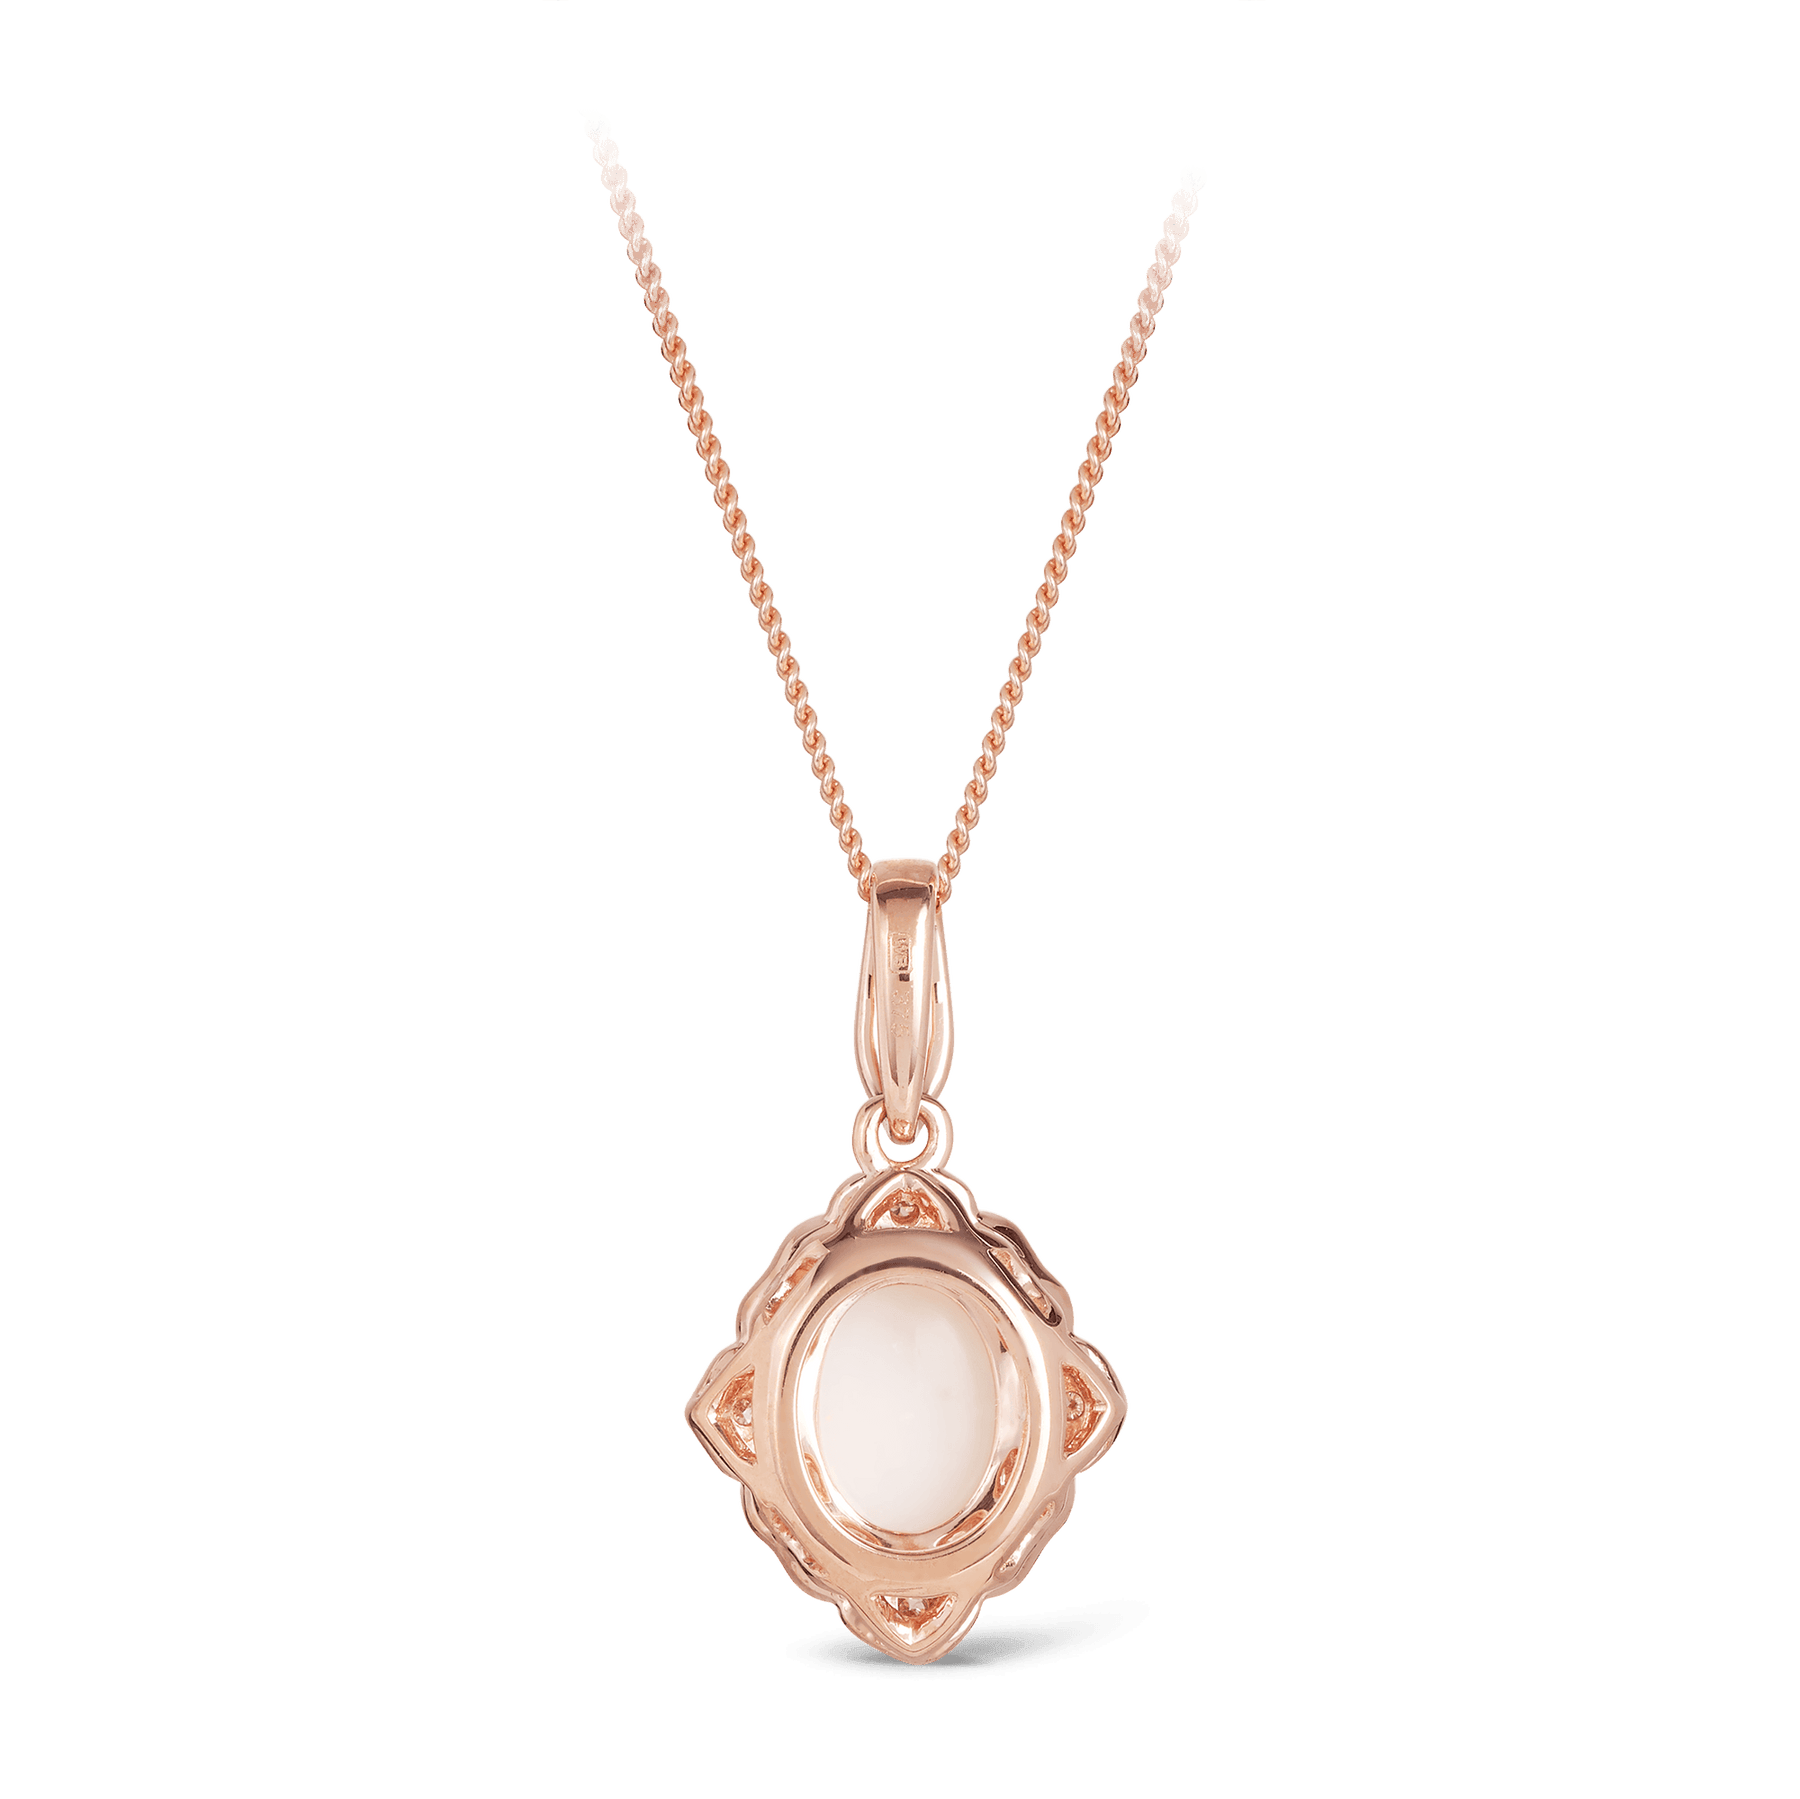 Solid White Opal & Diamond Pendant in 9ct Rose Gold - Wallace Bishop